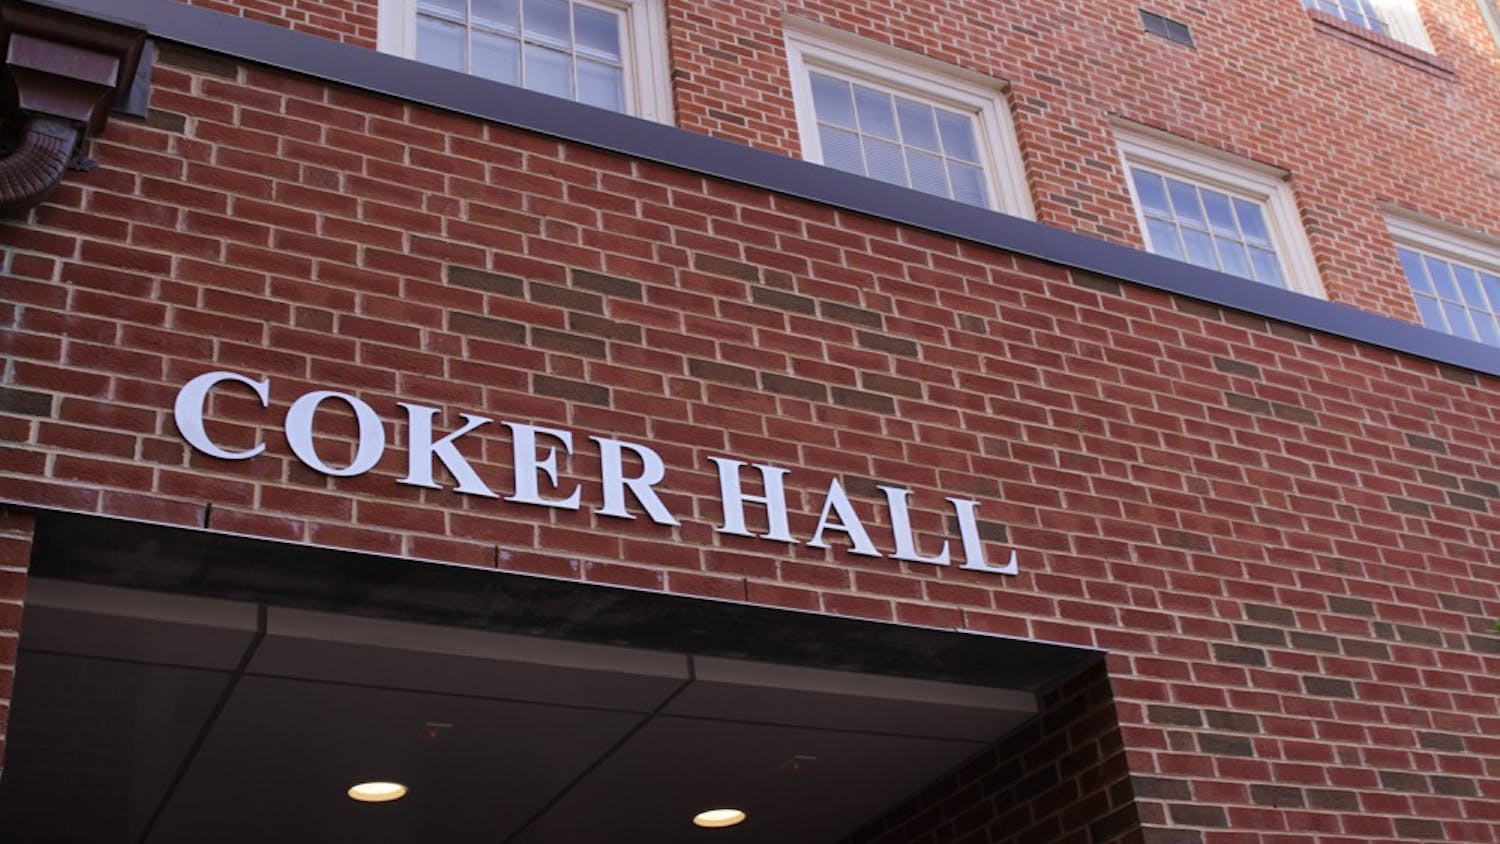 Coker Hall is home to the biology department.